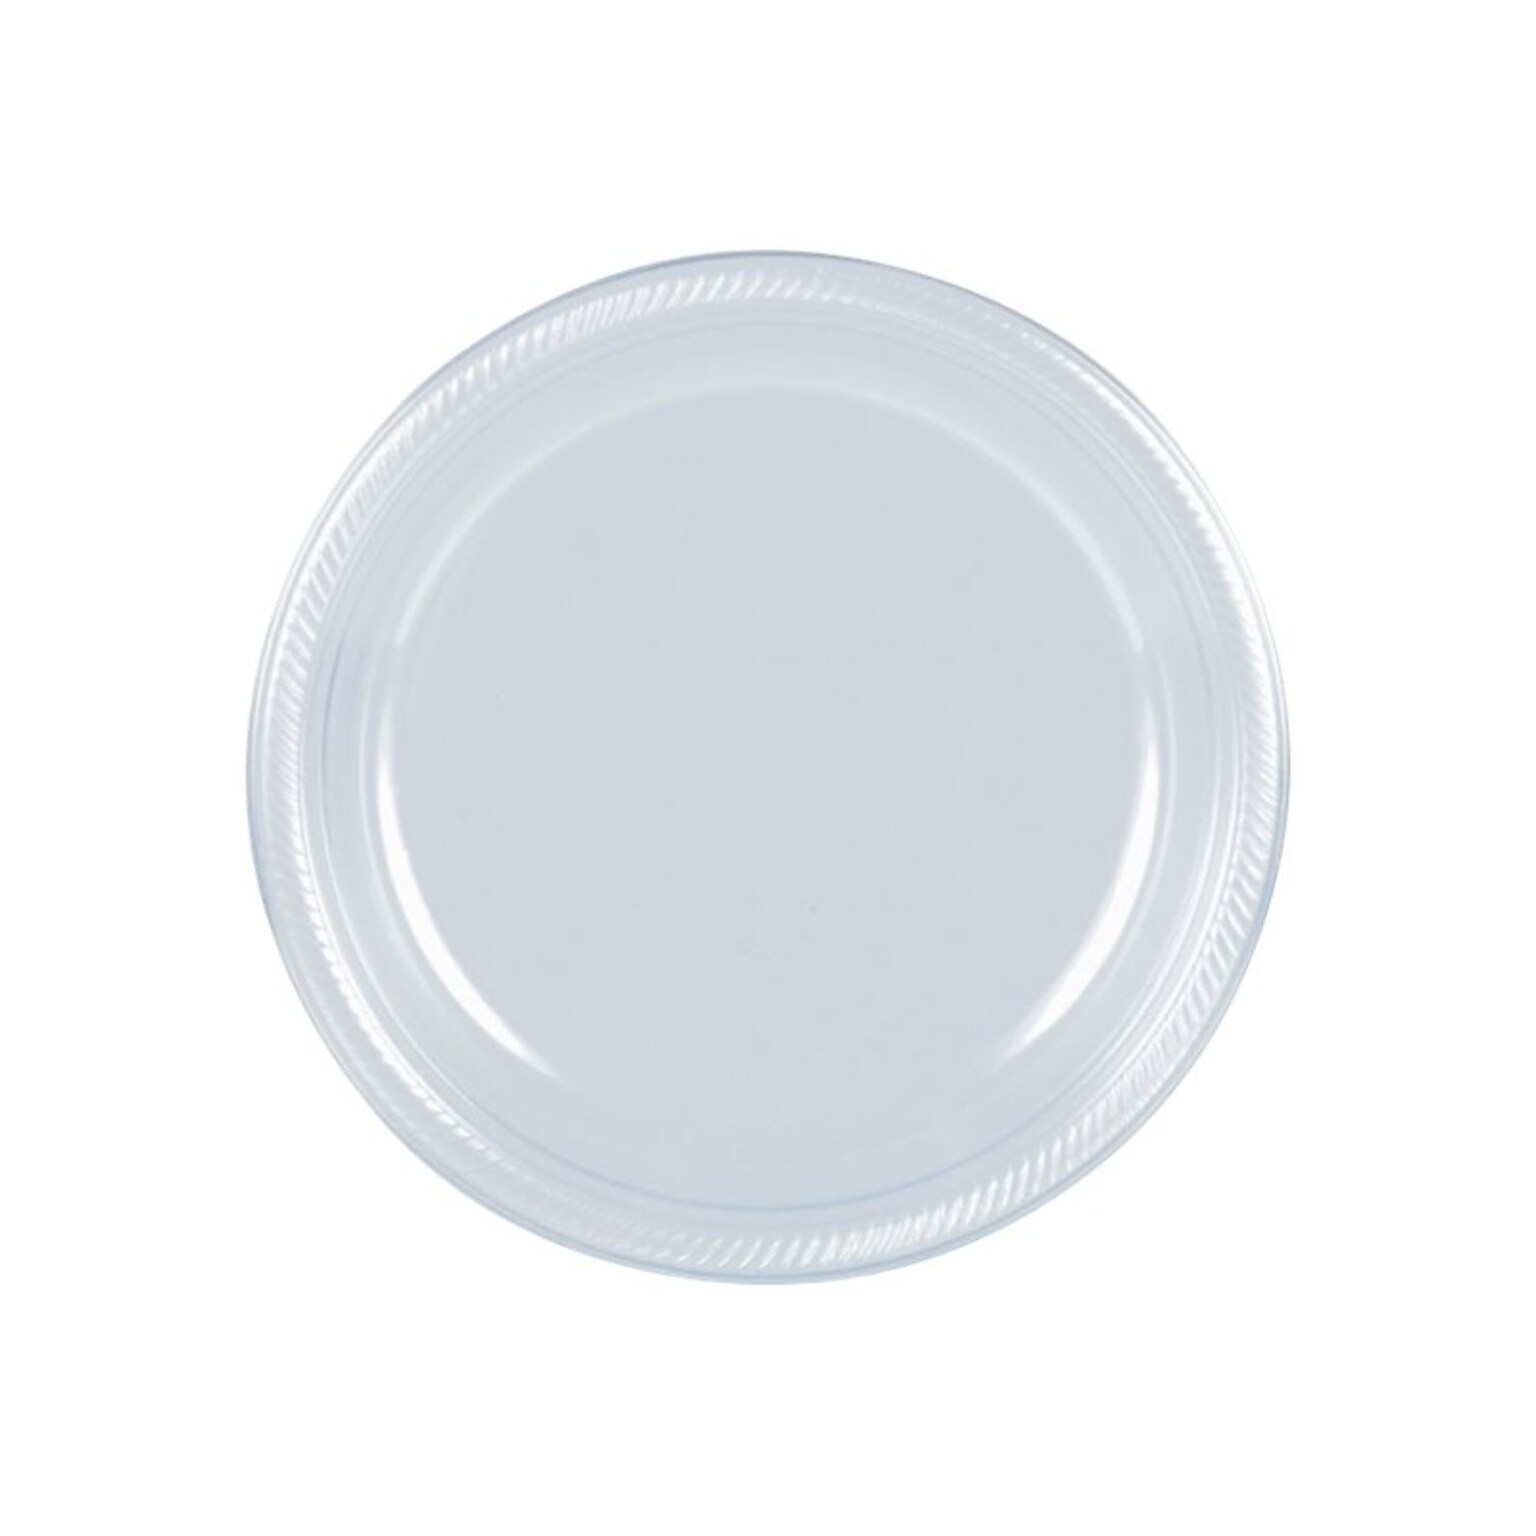 Amscan Plastic Plates, Clear, 50/Pack, 3 Packs (630730.86)